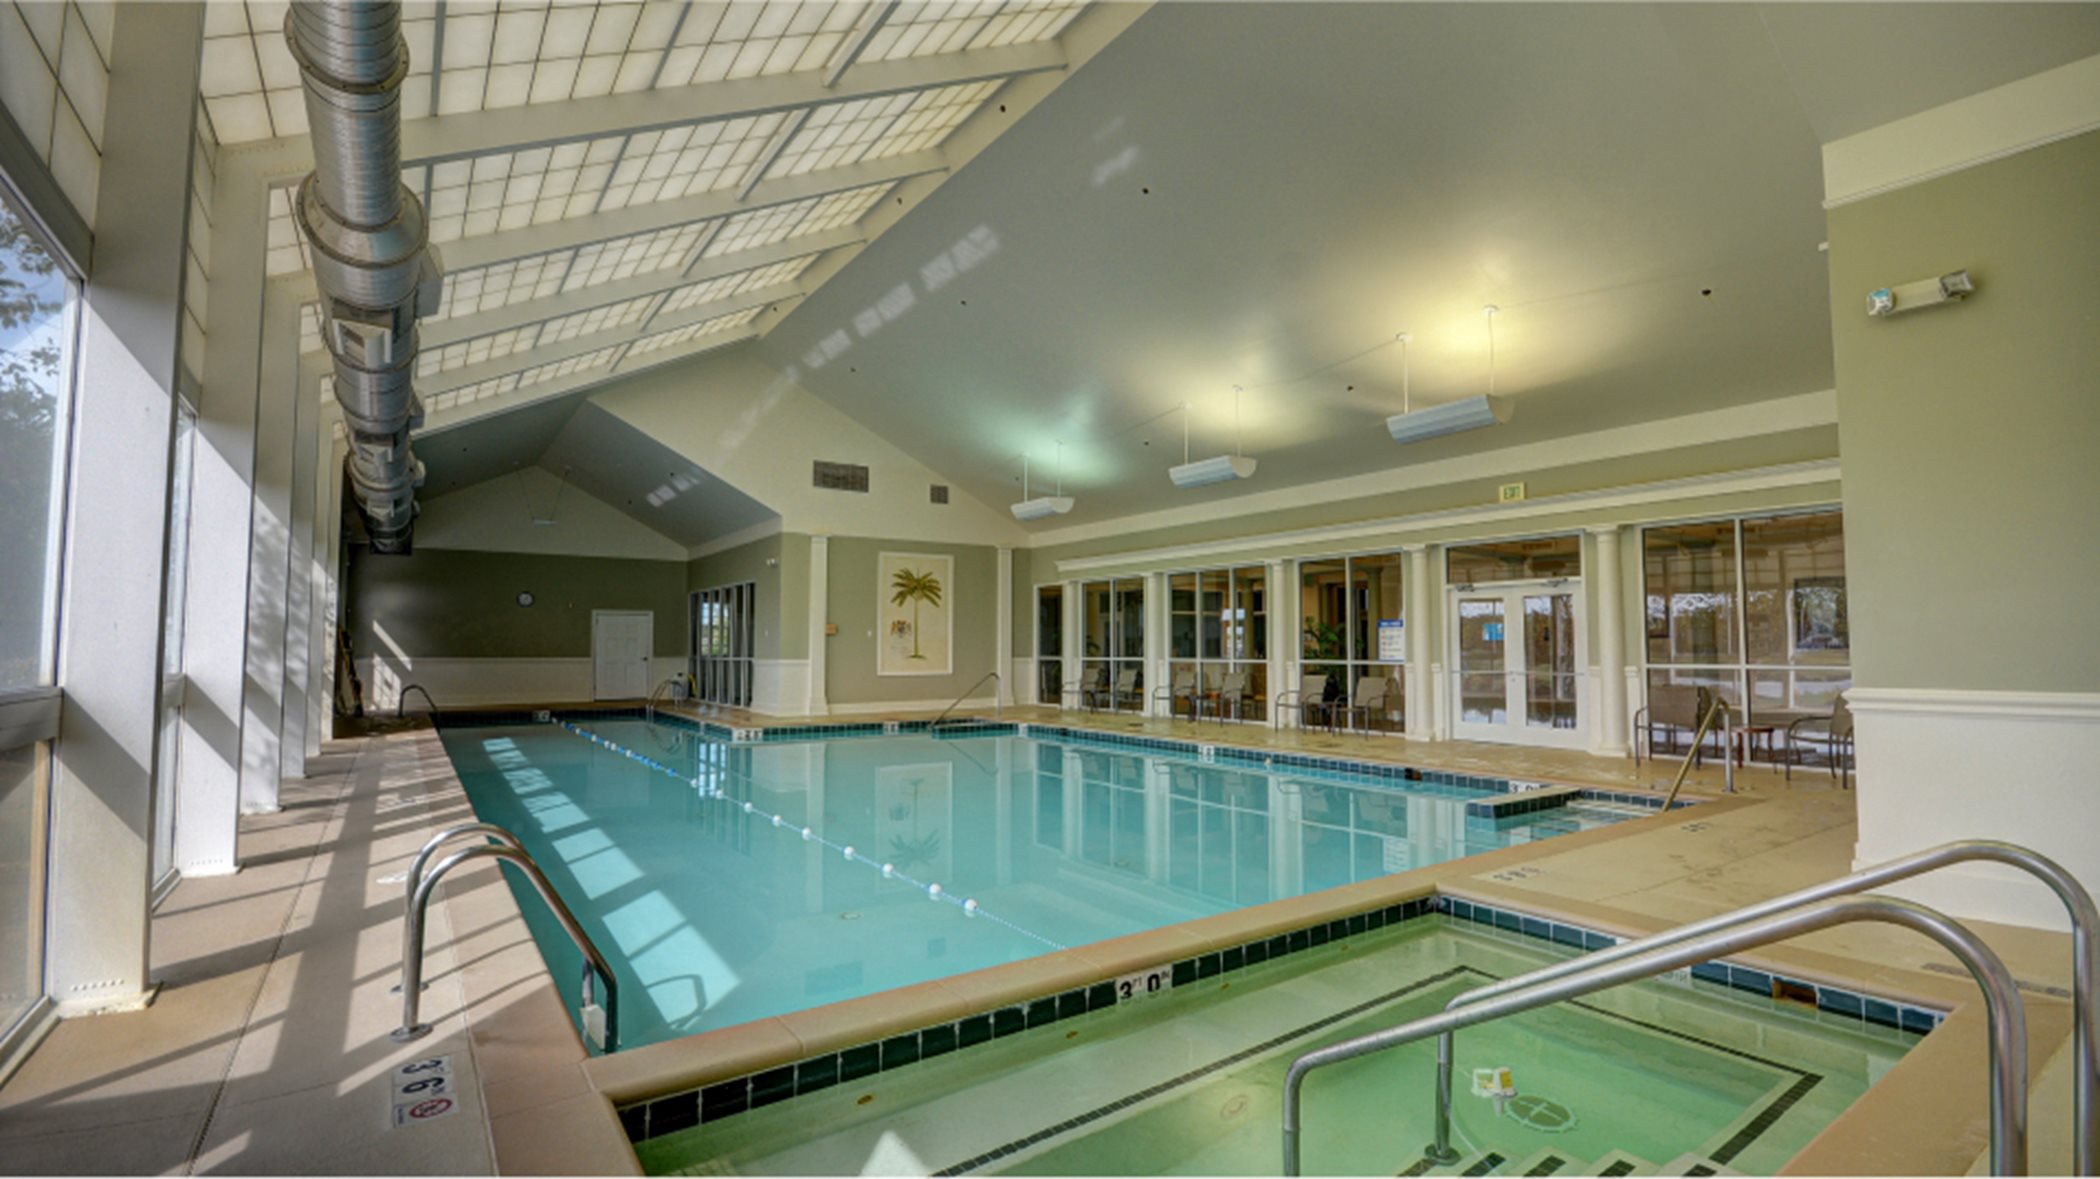 Colonial Heritage indoor swimming pool